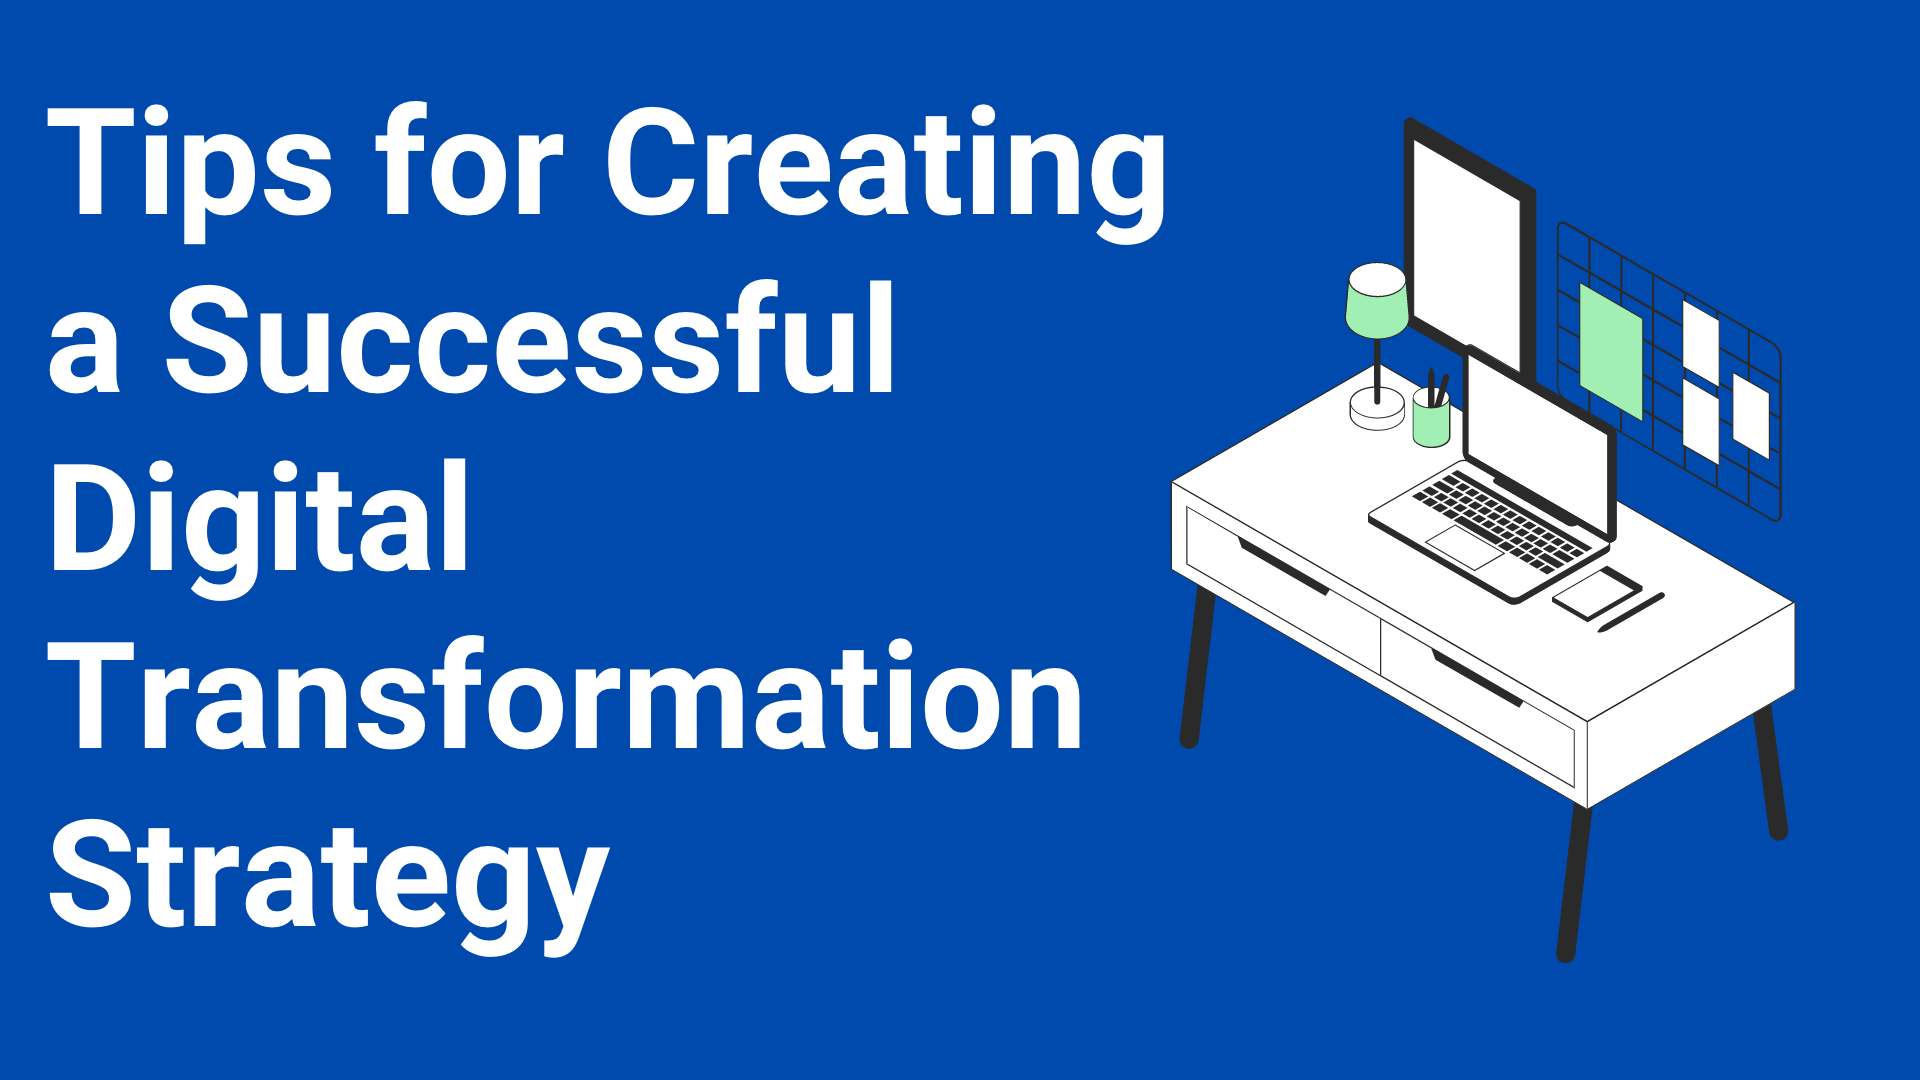 Tips for Creating a Successful Digital Transformation Strategy